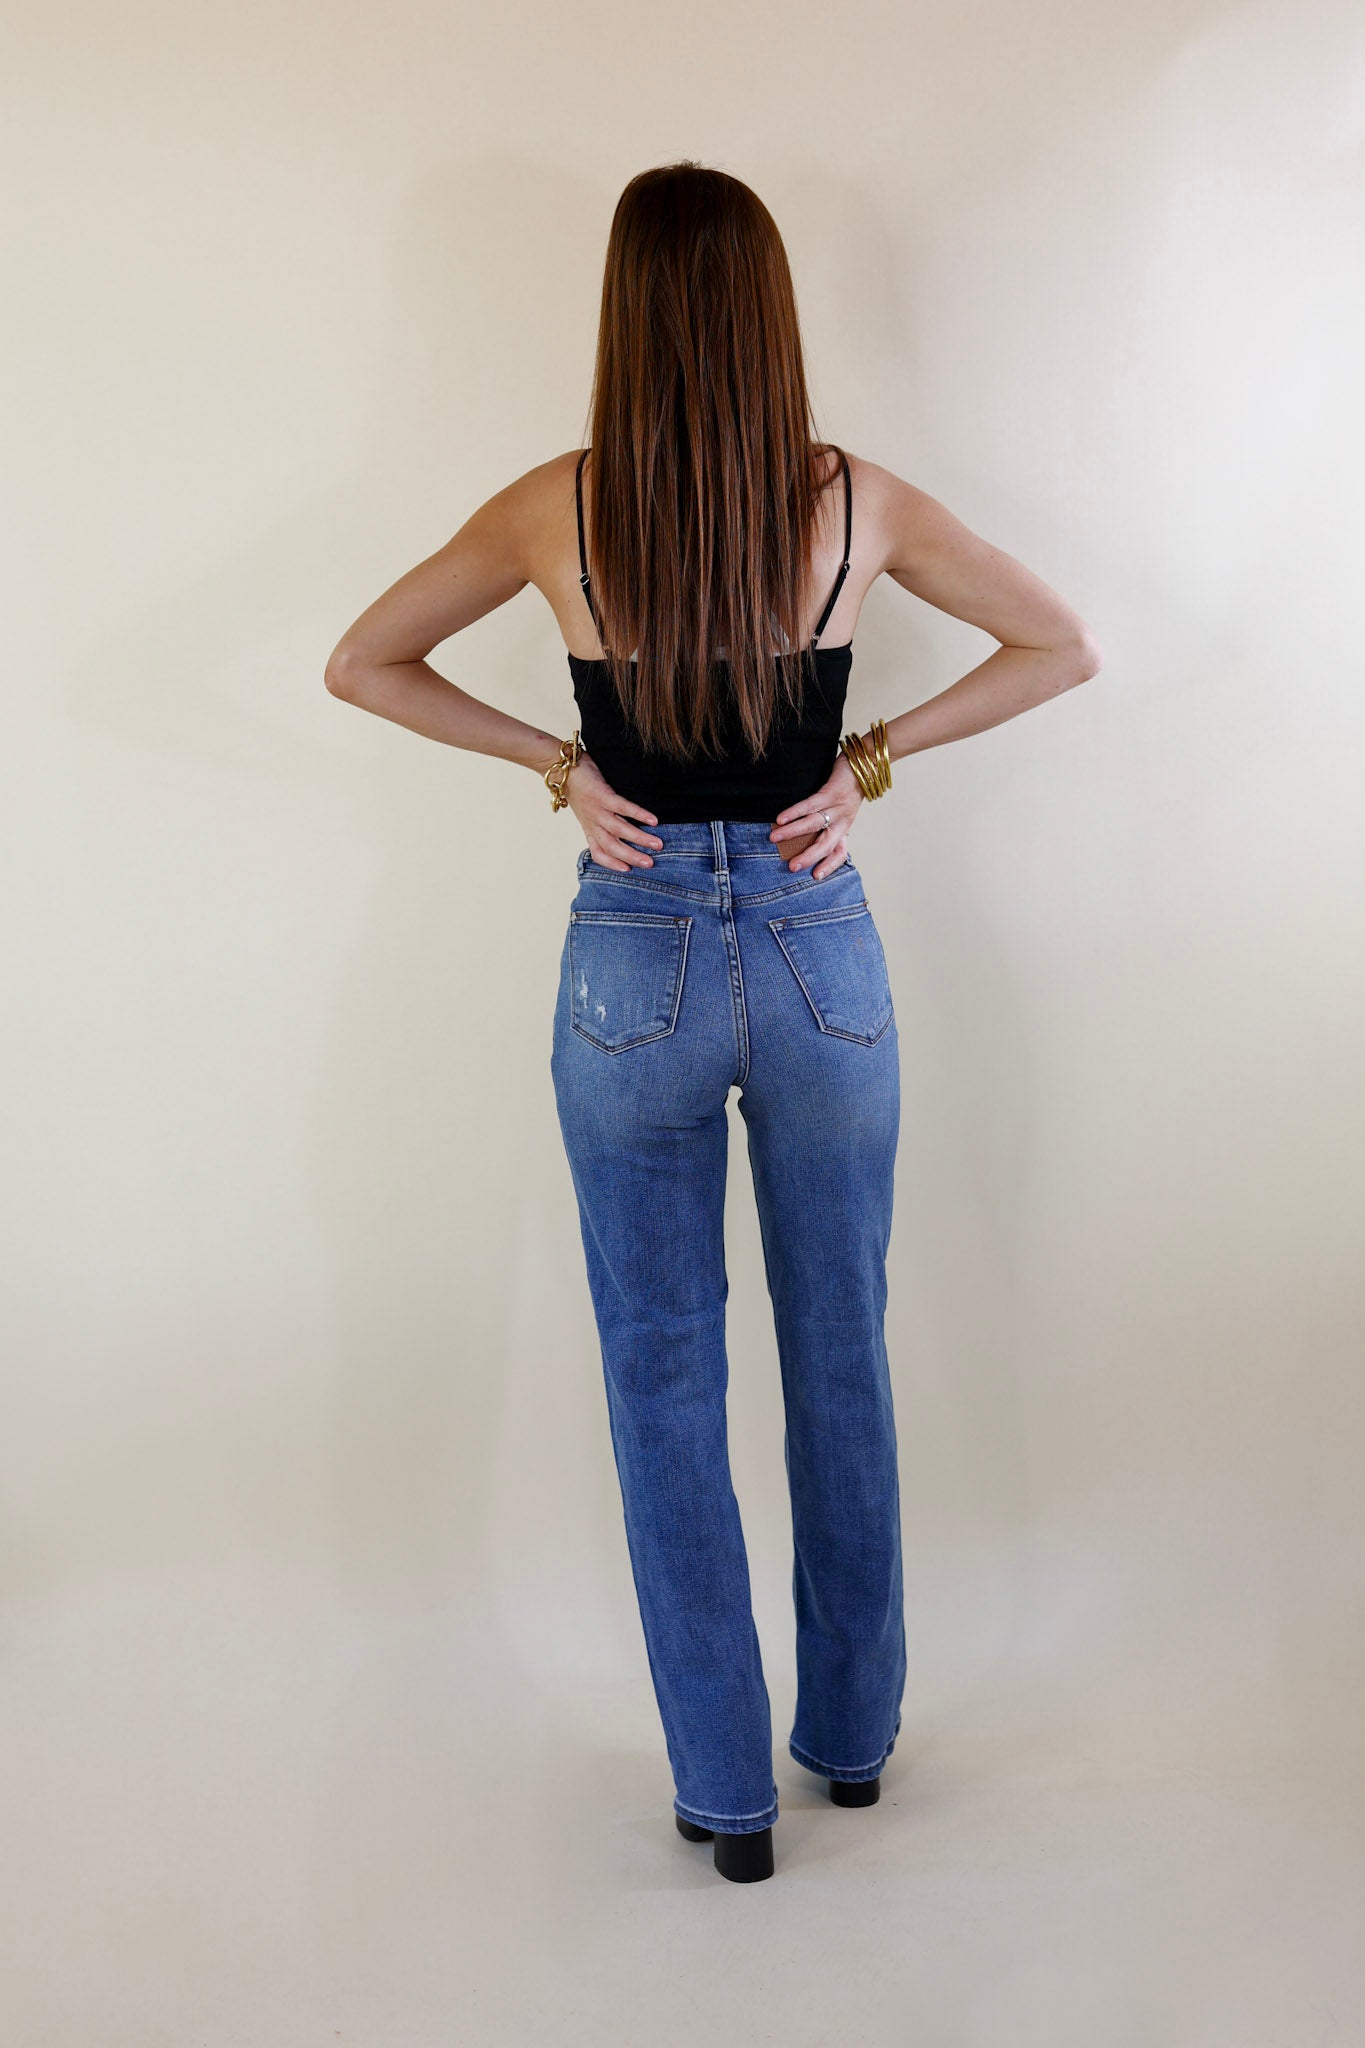 Judy Blue | Festival Feels Tummy Control 90's Straight Leg Jeans in Medium Wash - Giddy Up Glamour Boutique